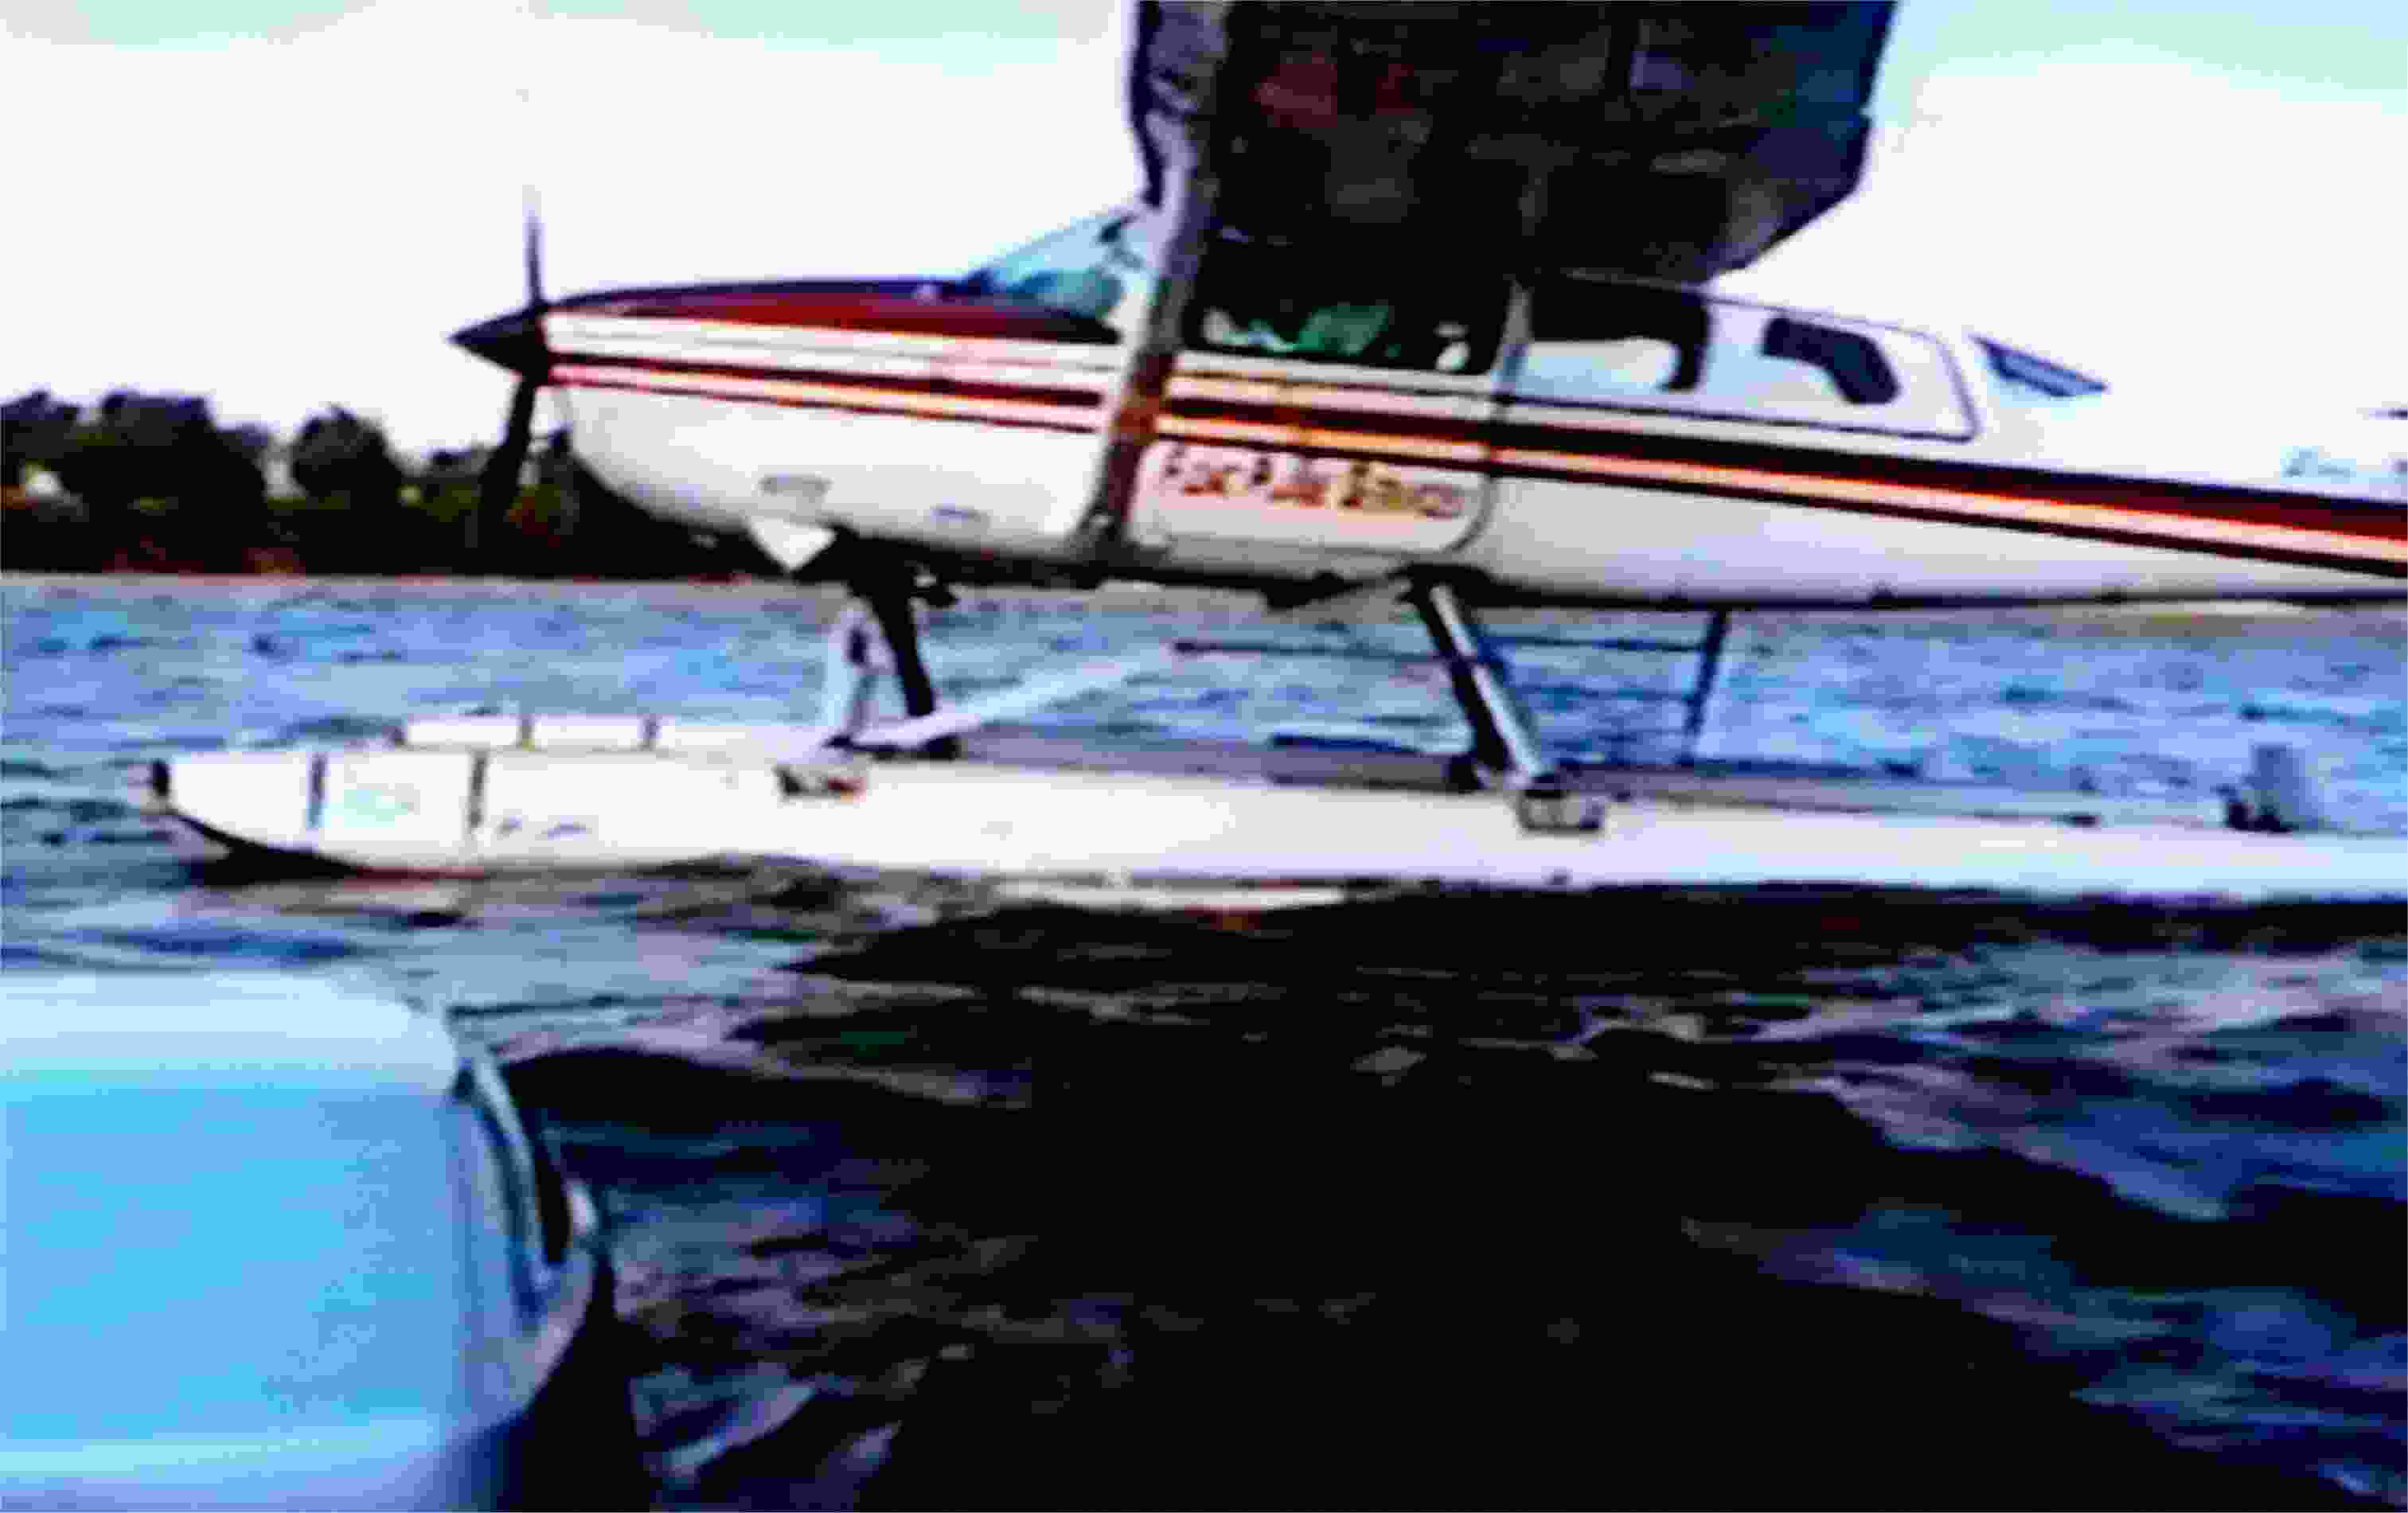 We jumped off the seaplane into boats for our ride the rest of the way to Ruckomechi Camp.  Photo from video by FG.